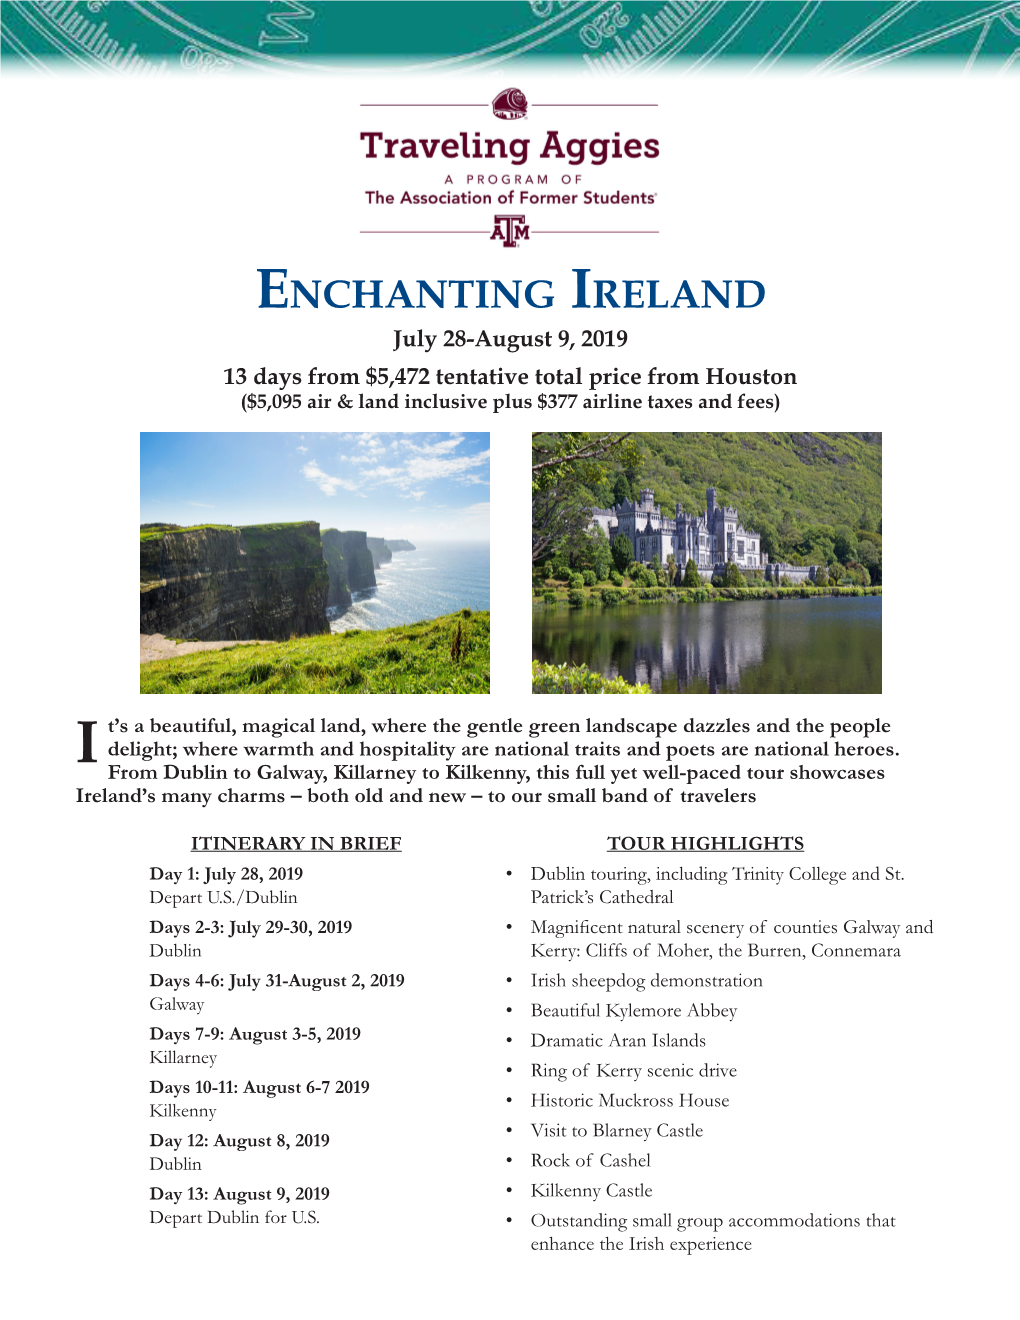 Enchanting Ireland July 28-August 9, 2019 13 Days from $5,472 Tentative Total Price from Houston ($5,095 Air & Land Inclusive Plus $377 Airline Taxes and Fees)